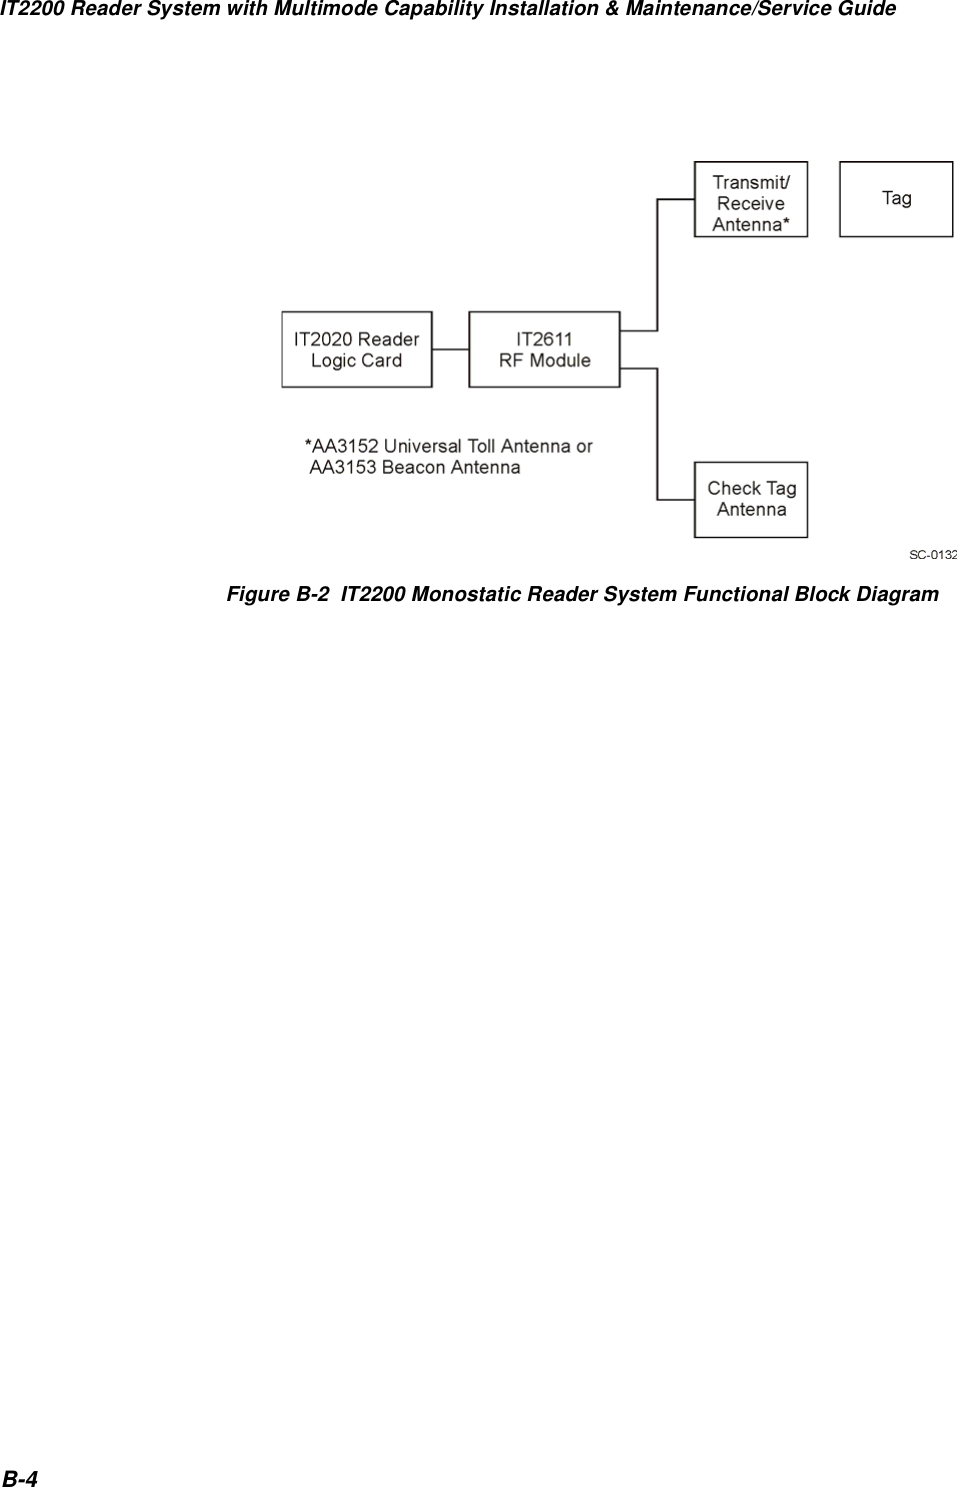 IT2200 Reader System with Multimode Capability Installation &amp; Maintenance/Service GuideB-4Figure B-2  IT2200 Monostatic Reader System Functional Block Diagram